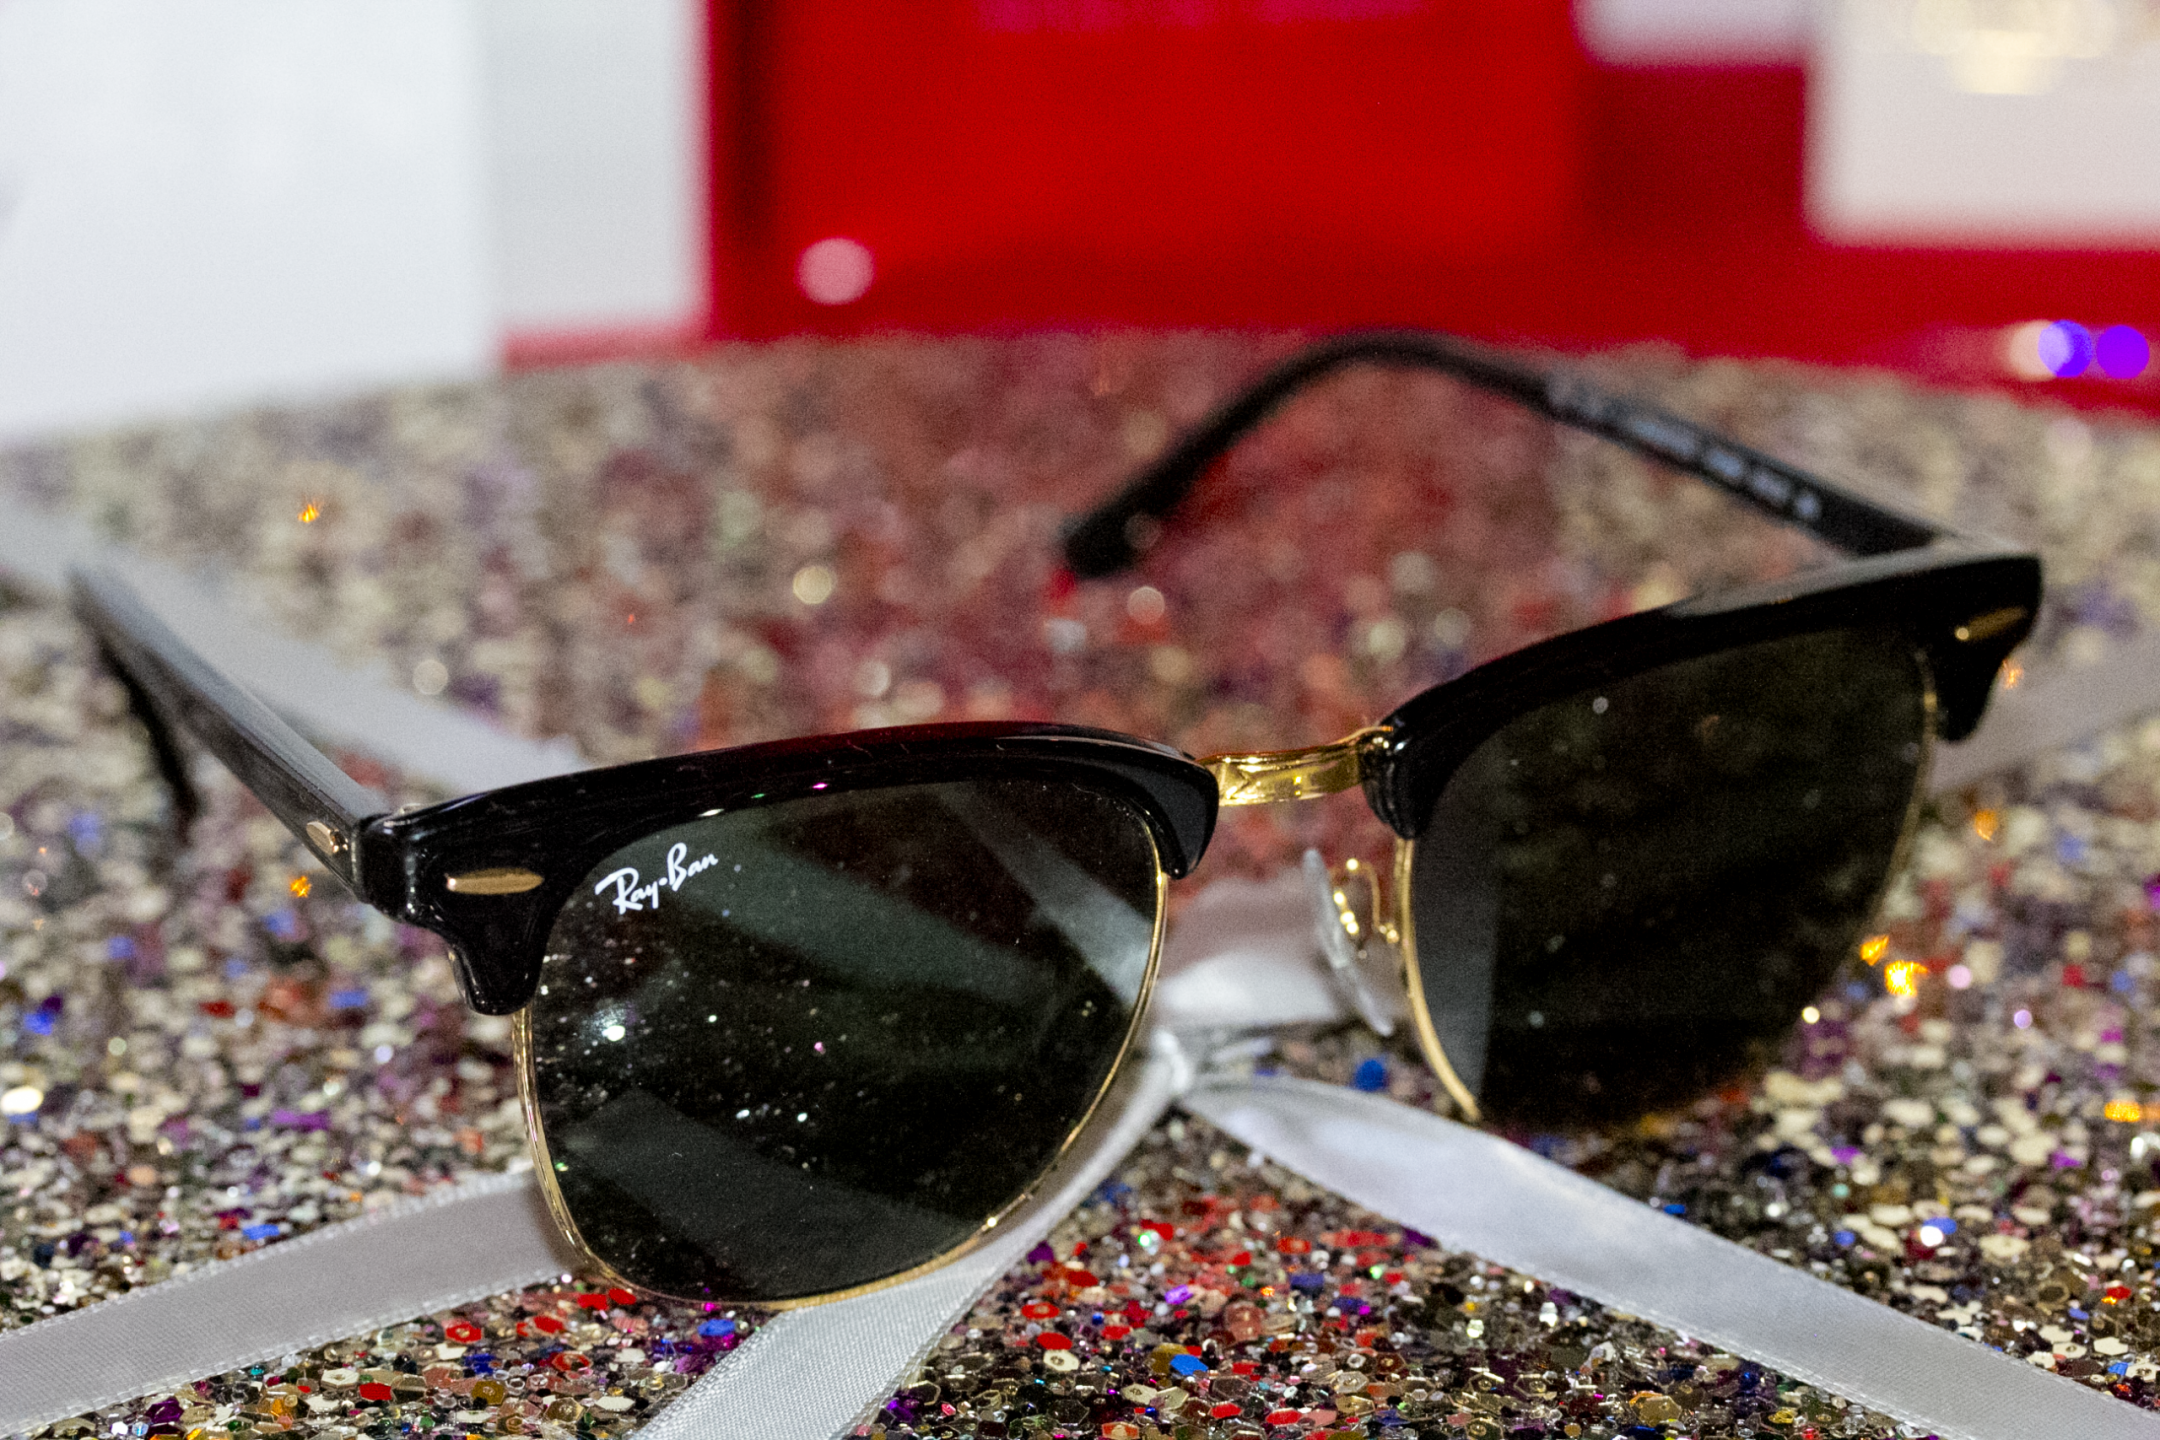 Ray Ban black clubmaster sunglasses favorite gift guide for the holidays